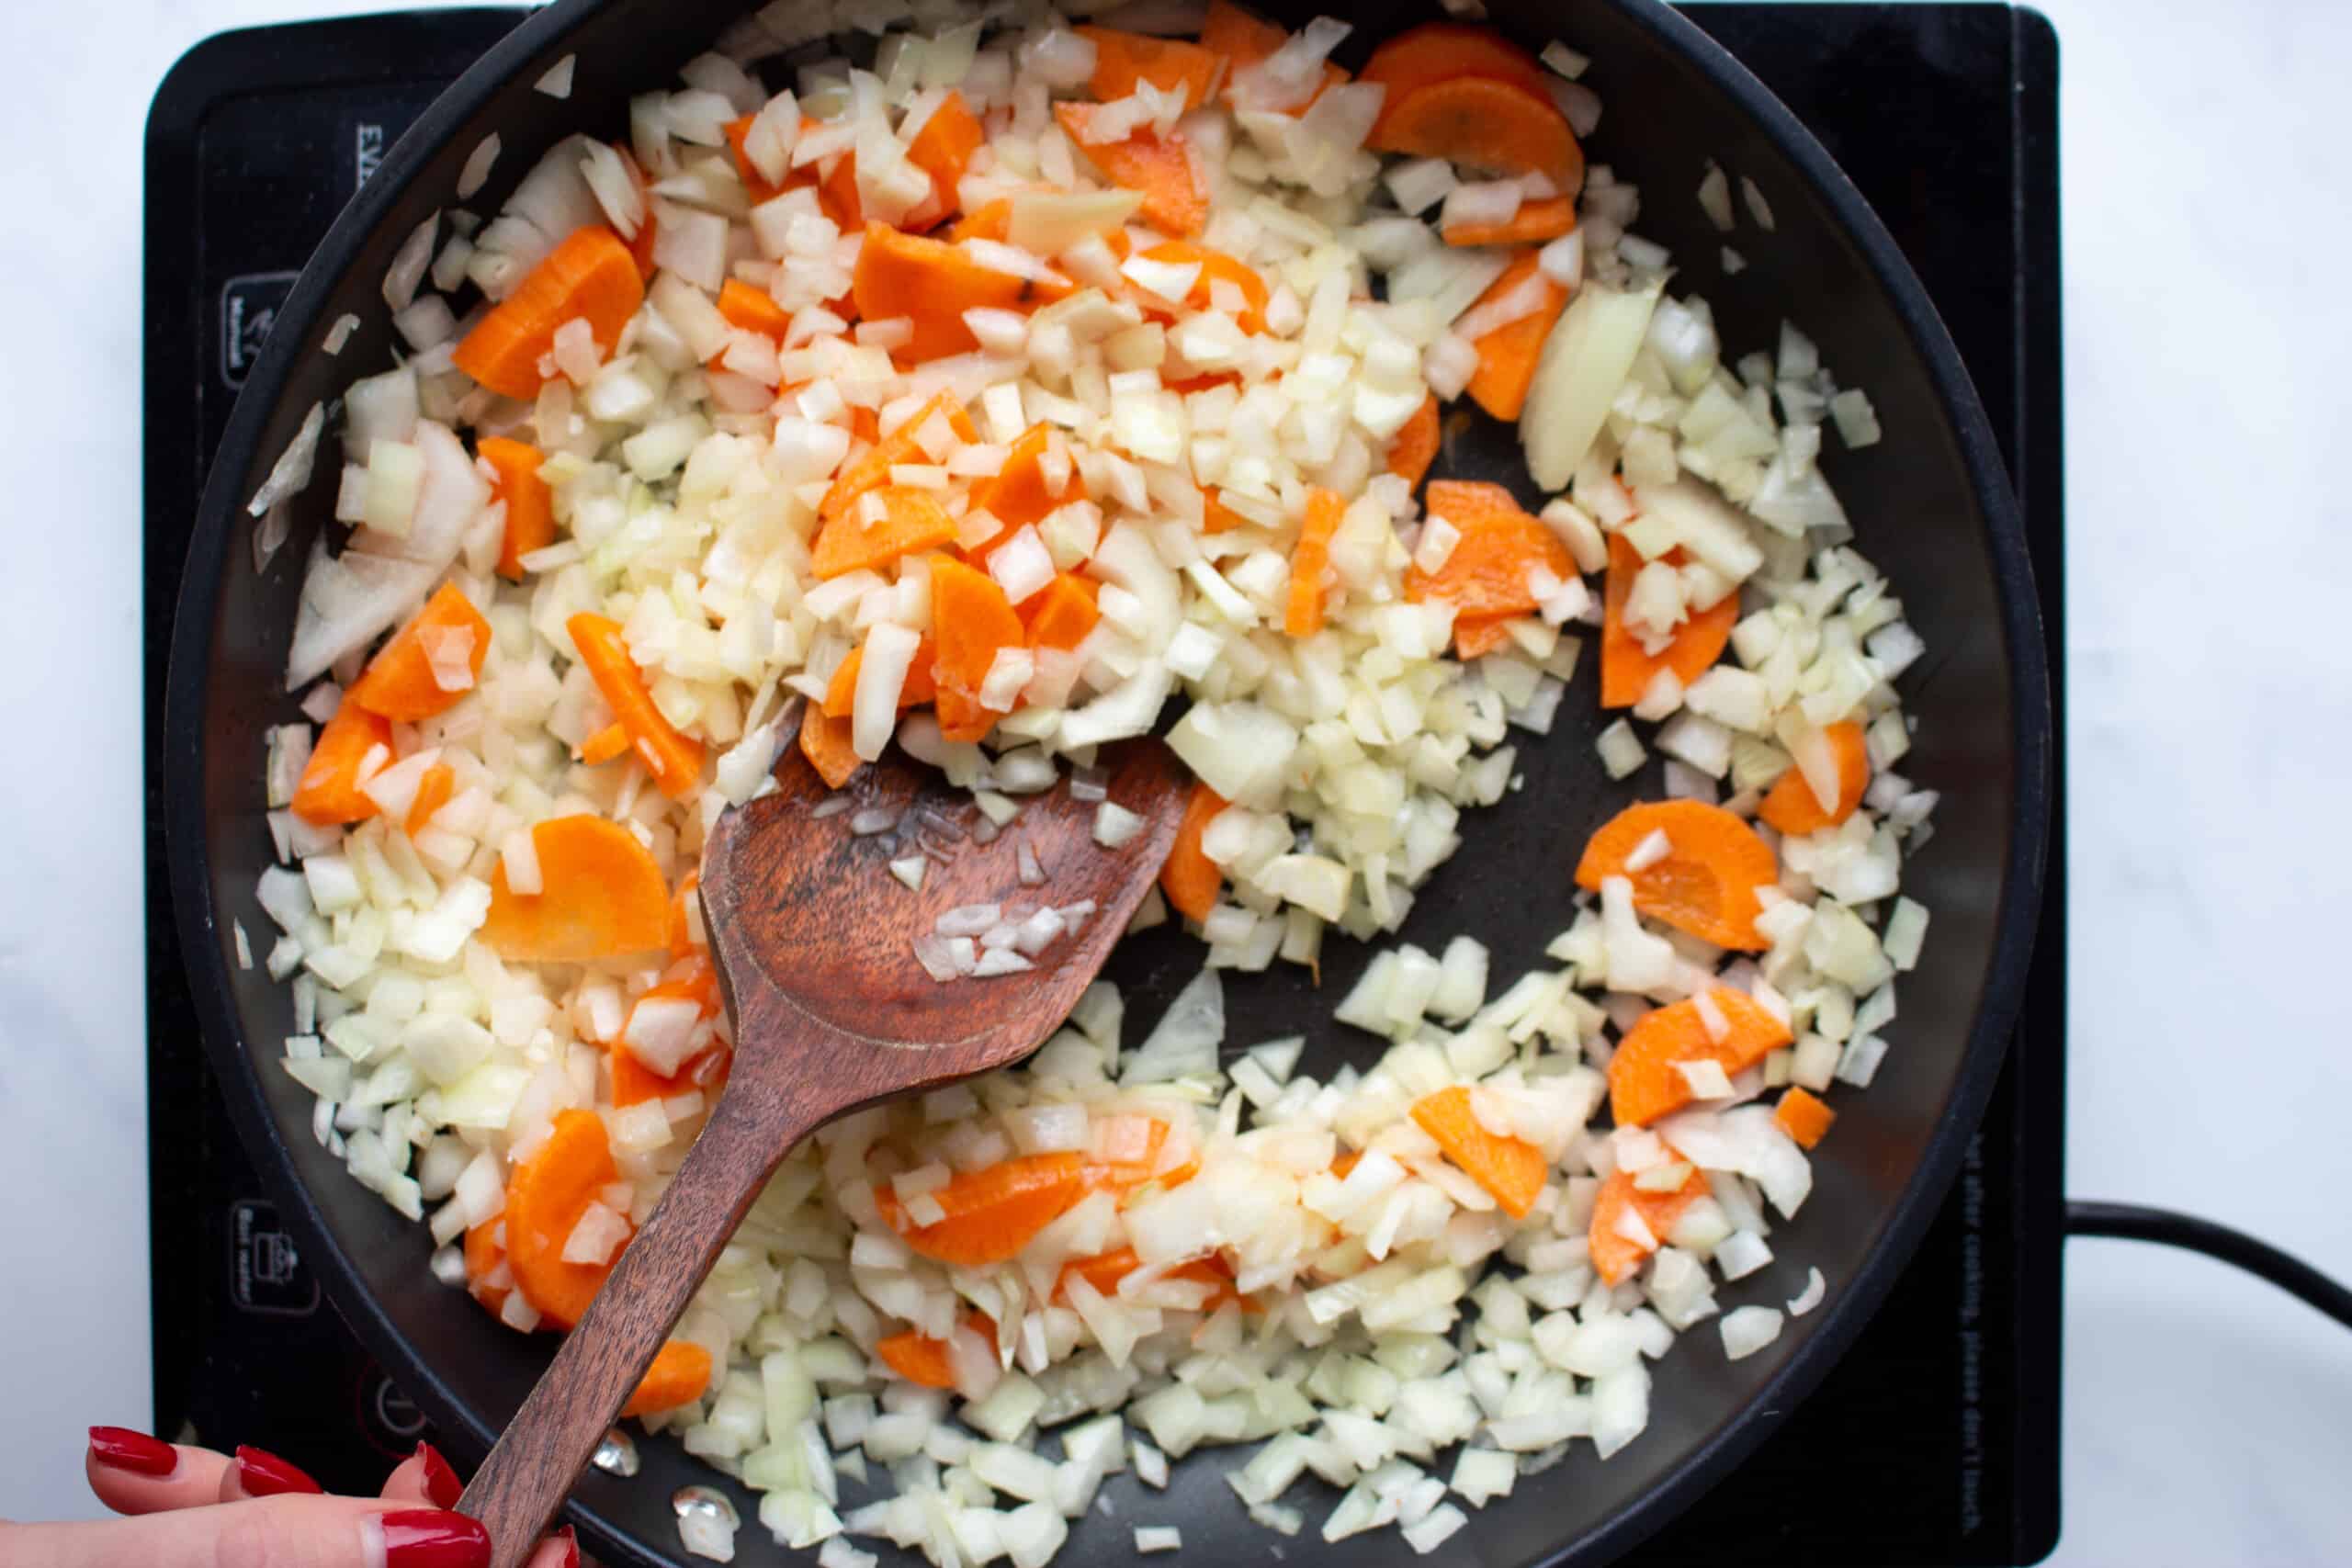 Carrot and onions in frying pan